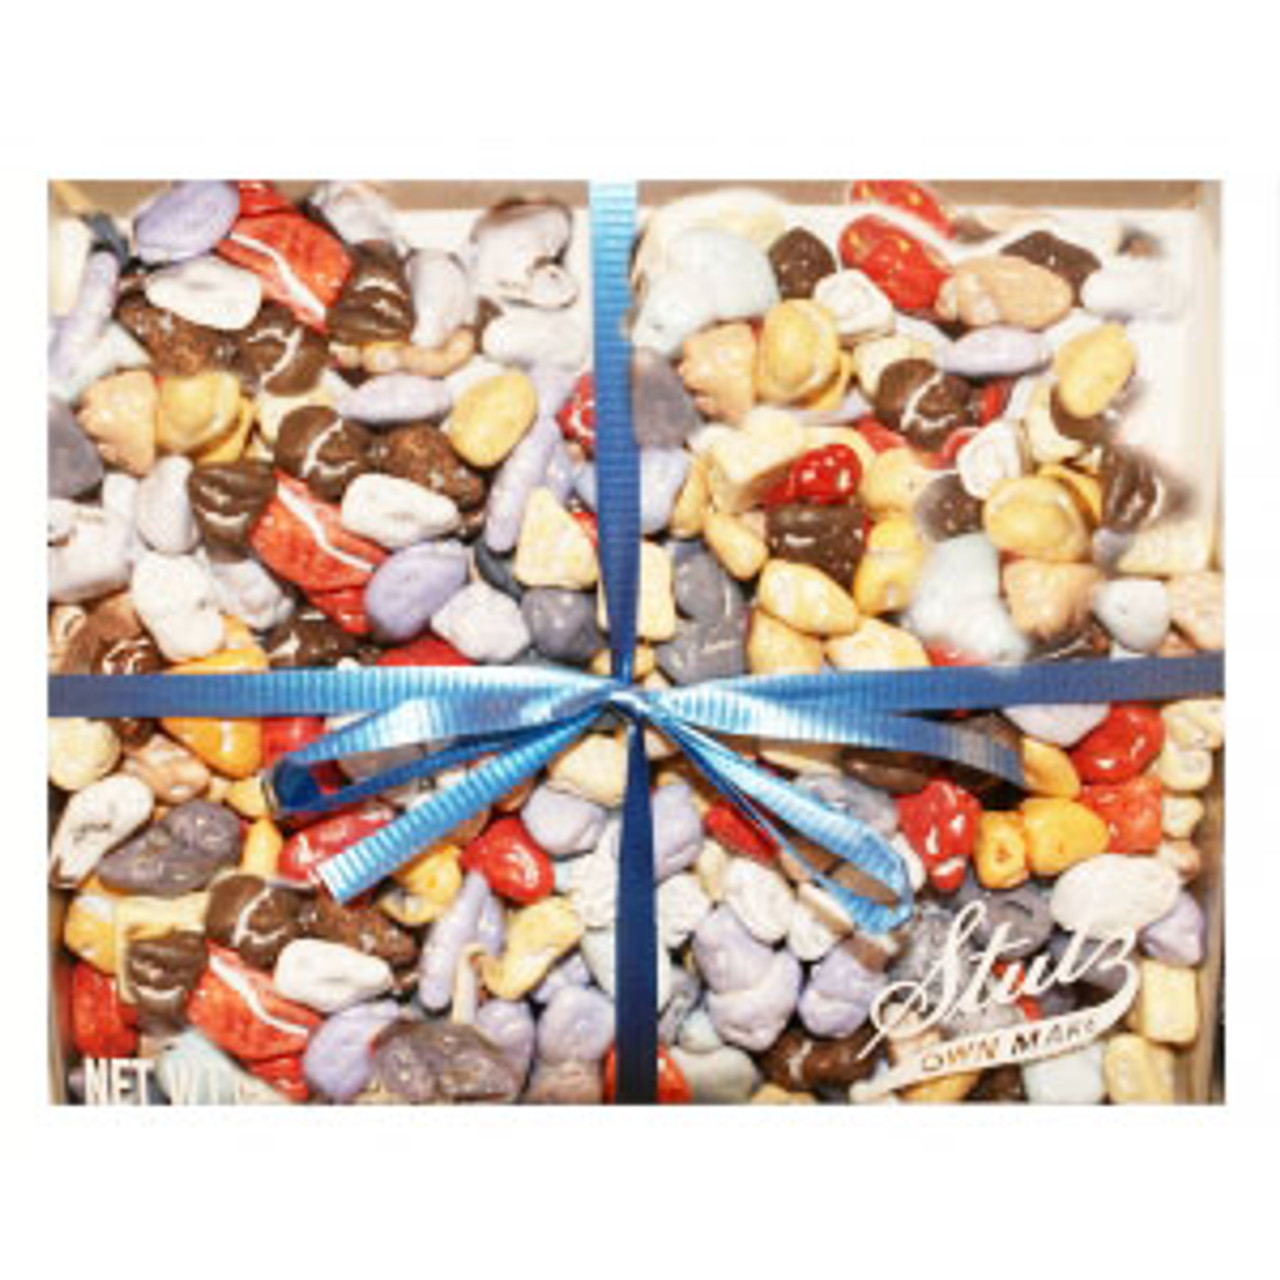 Chocorocks Riverstones Nuggets, Candy Coated Chocolate Shaped River Stones